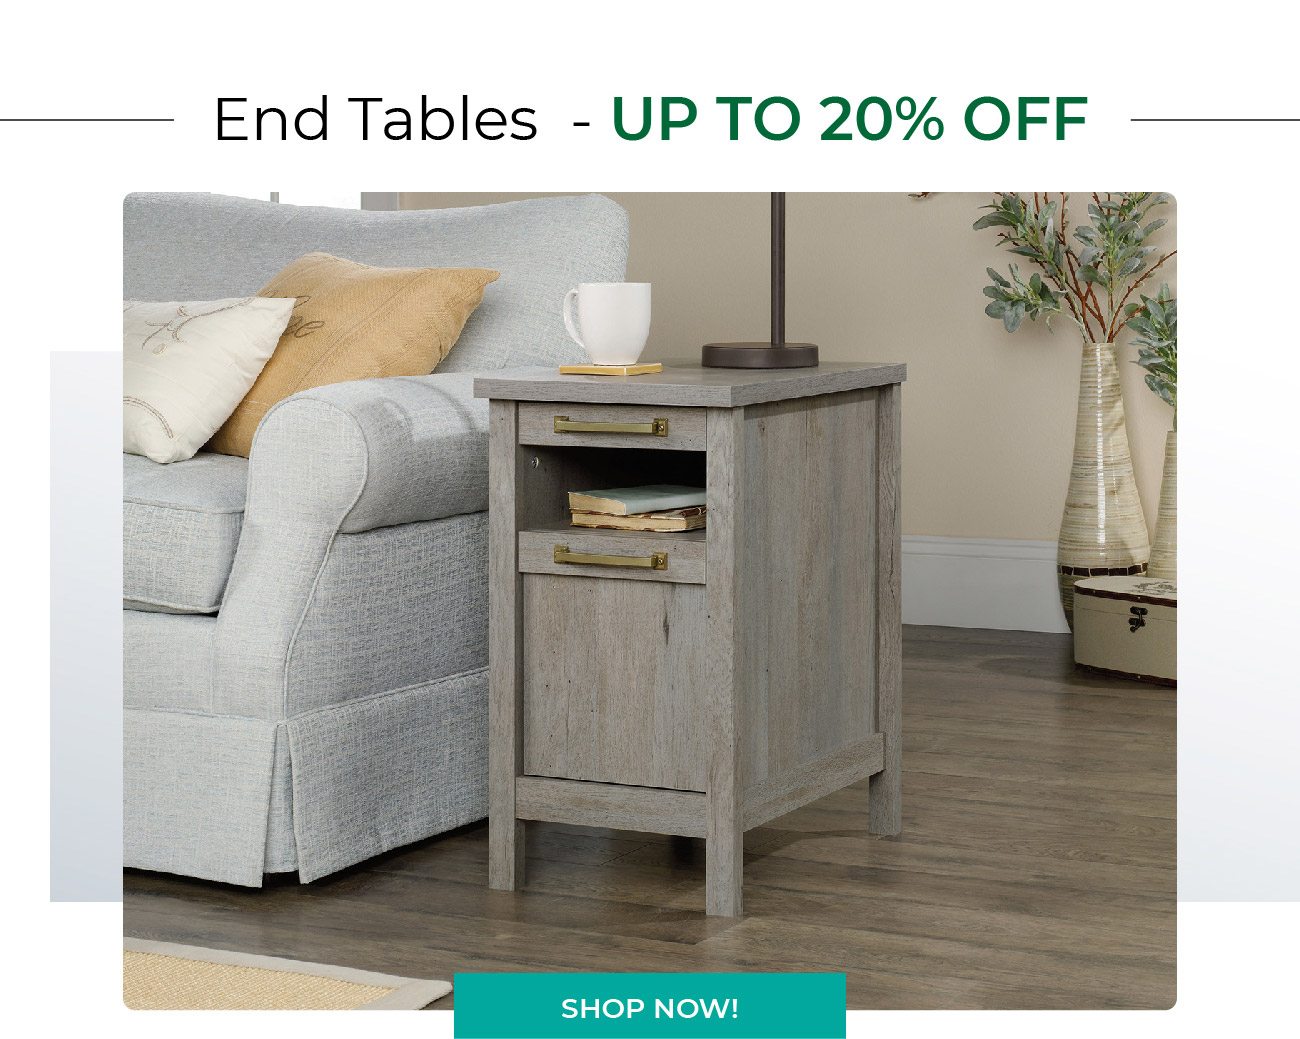 End Tables - Up to 20% off